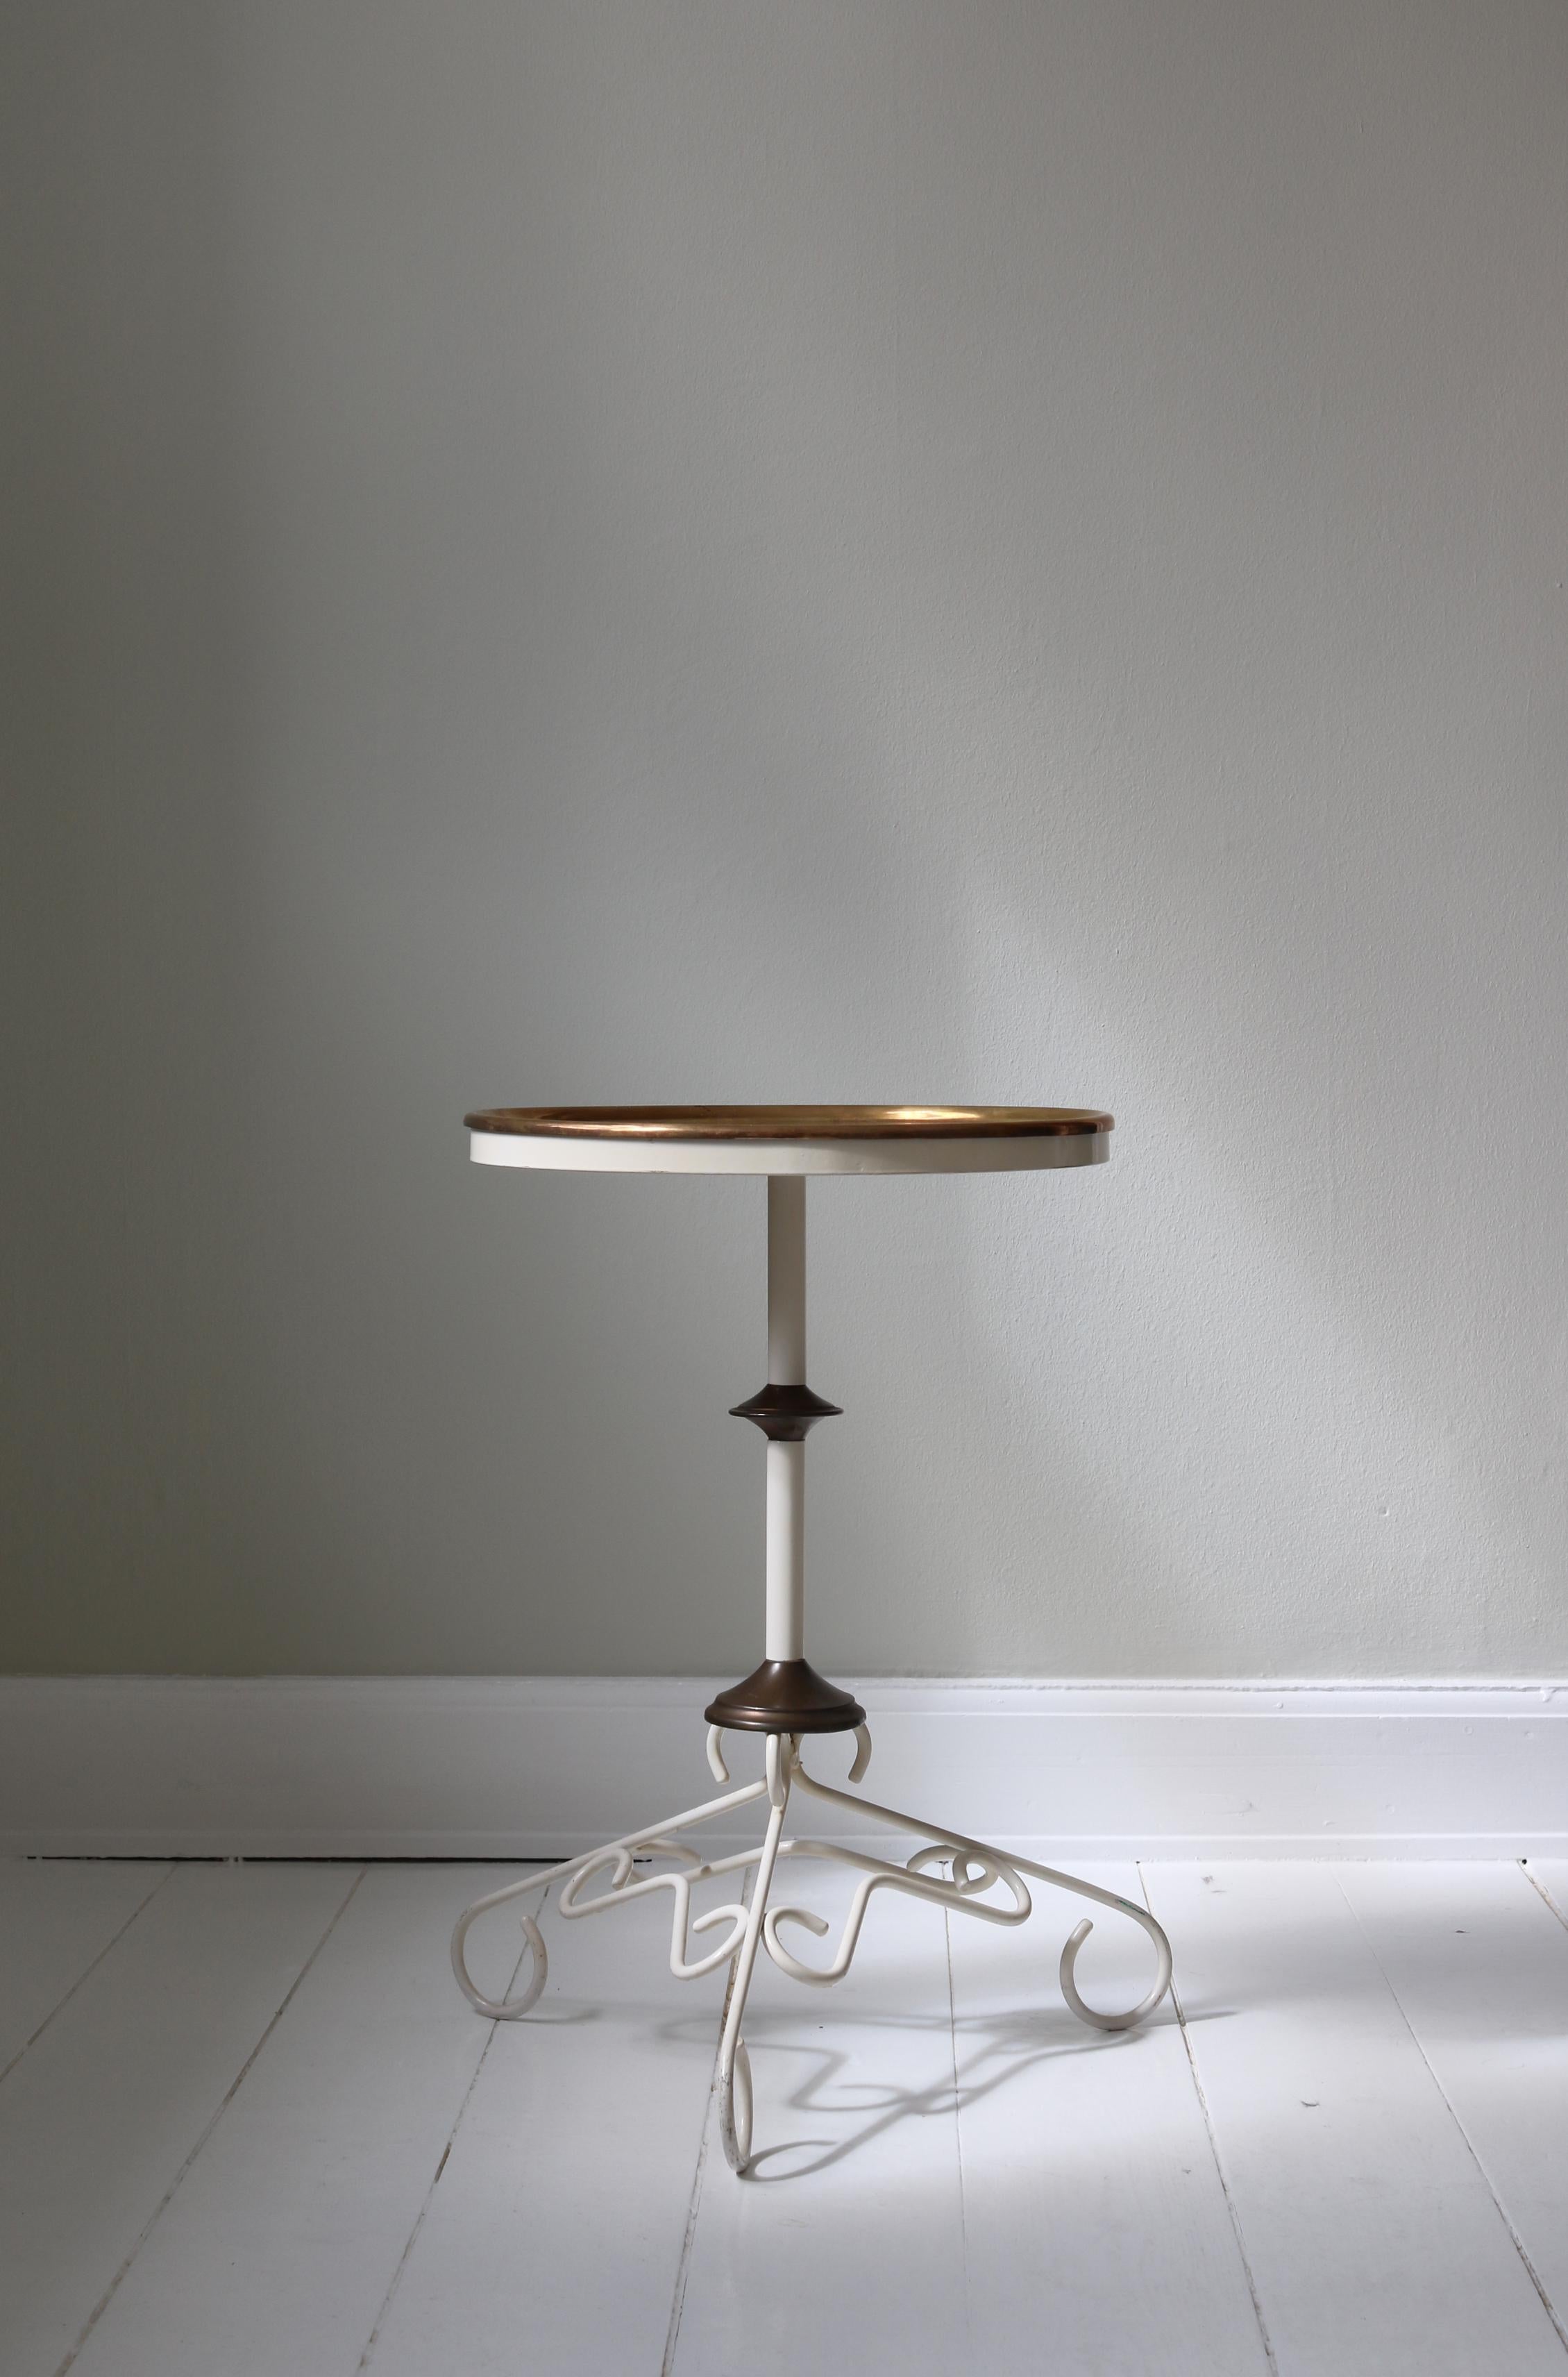 Danish Scandinavian Art Deco Occasional Table in Patinated Brass & Iron, 1930s For Sale